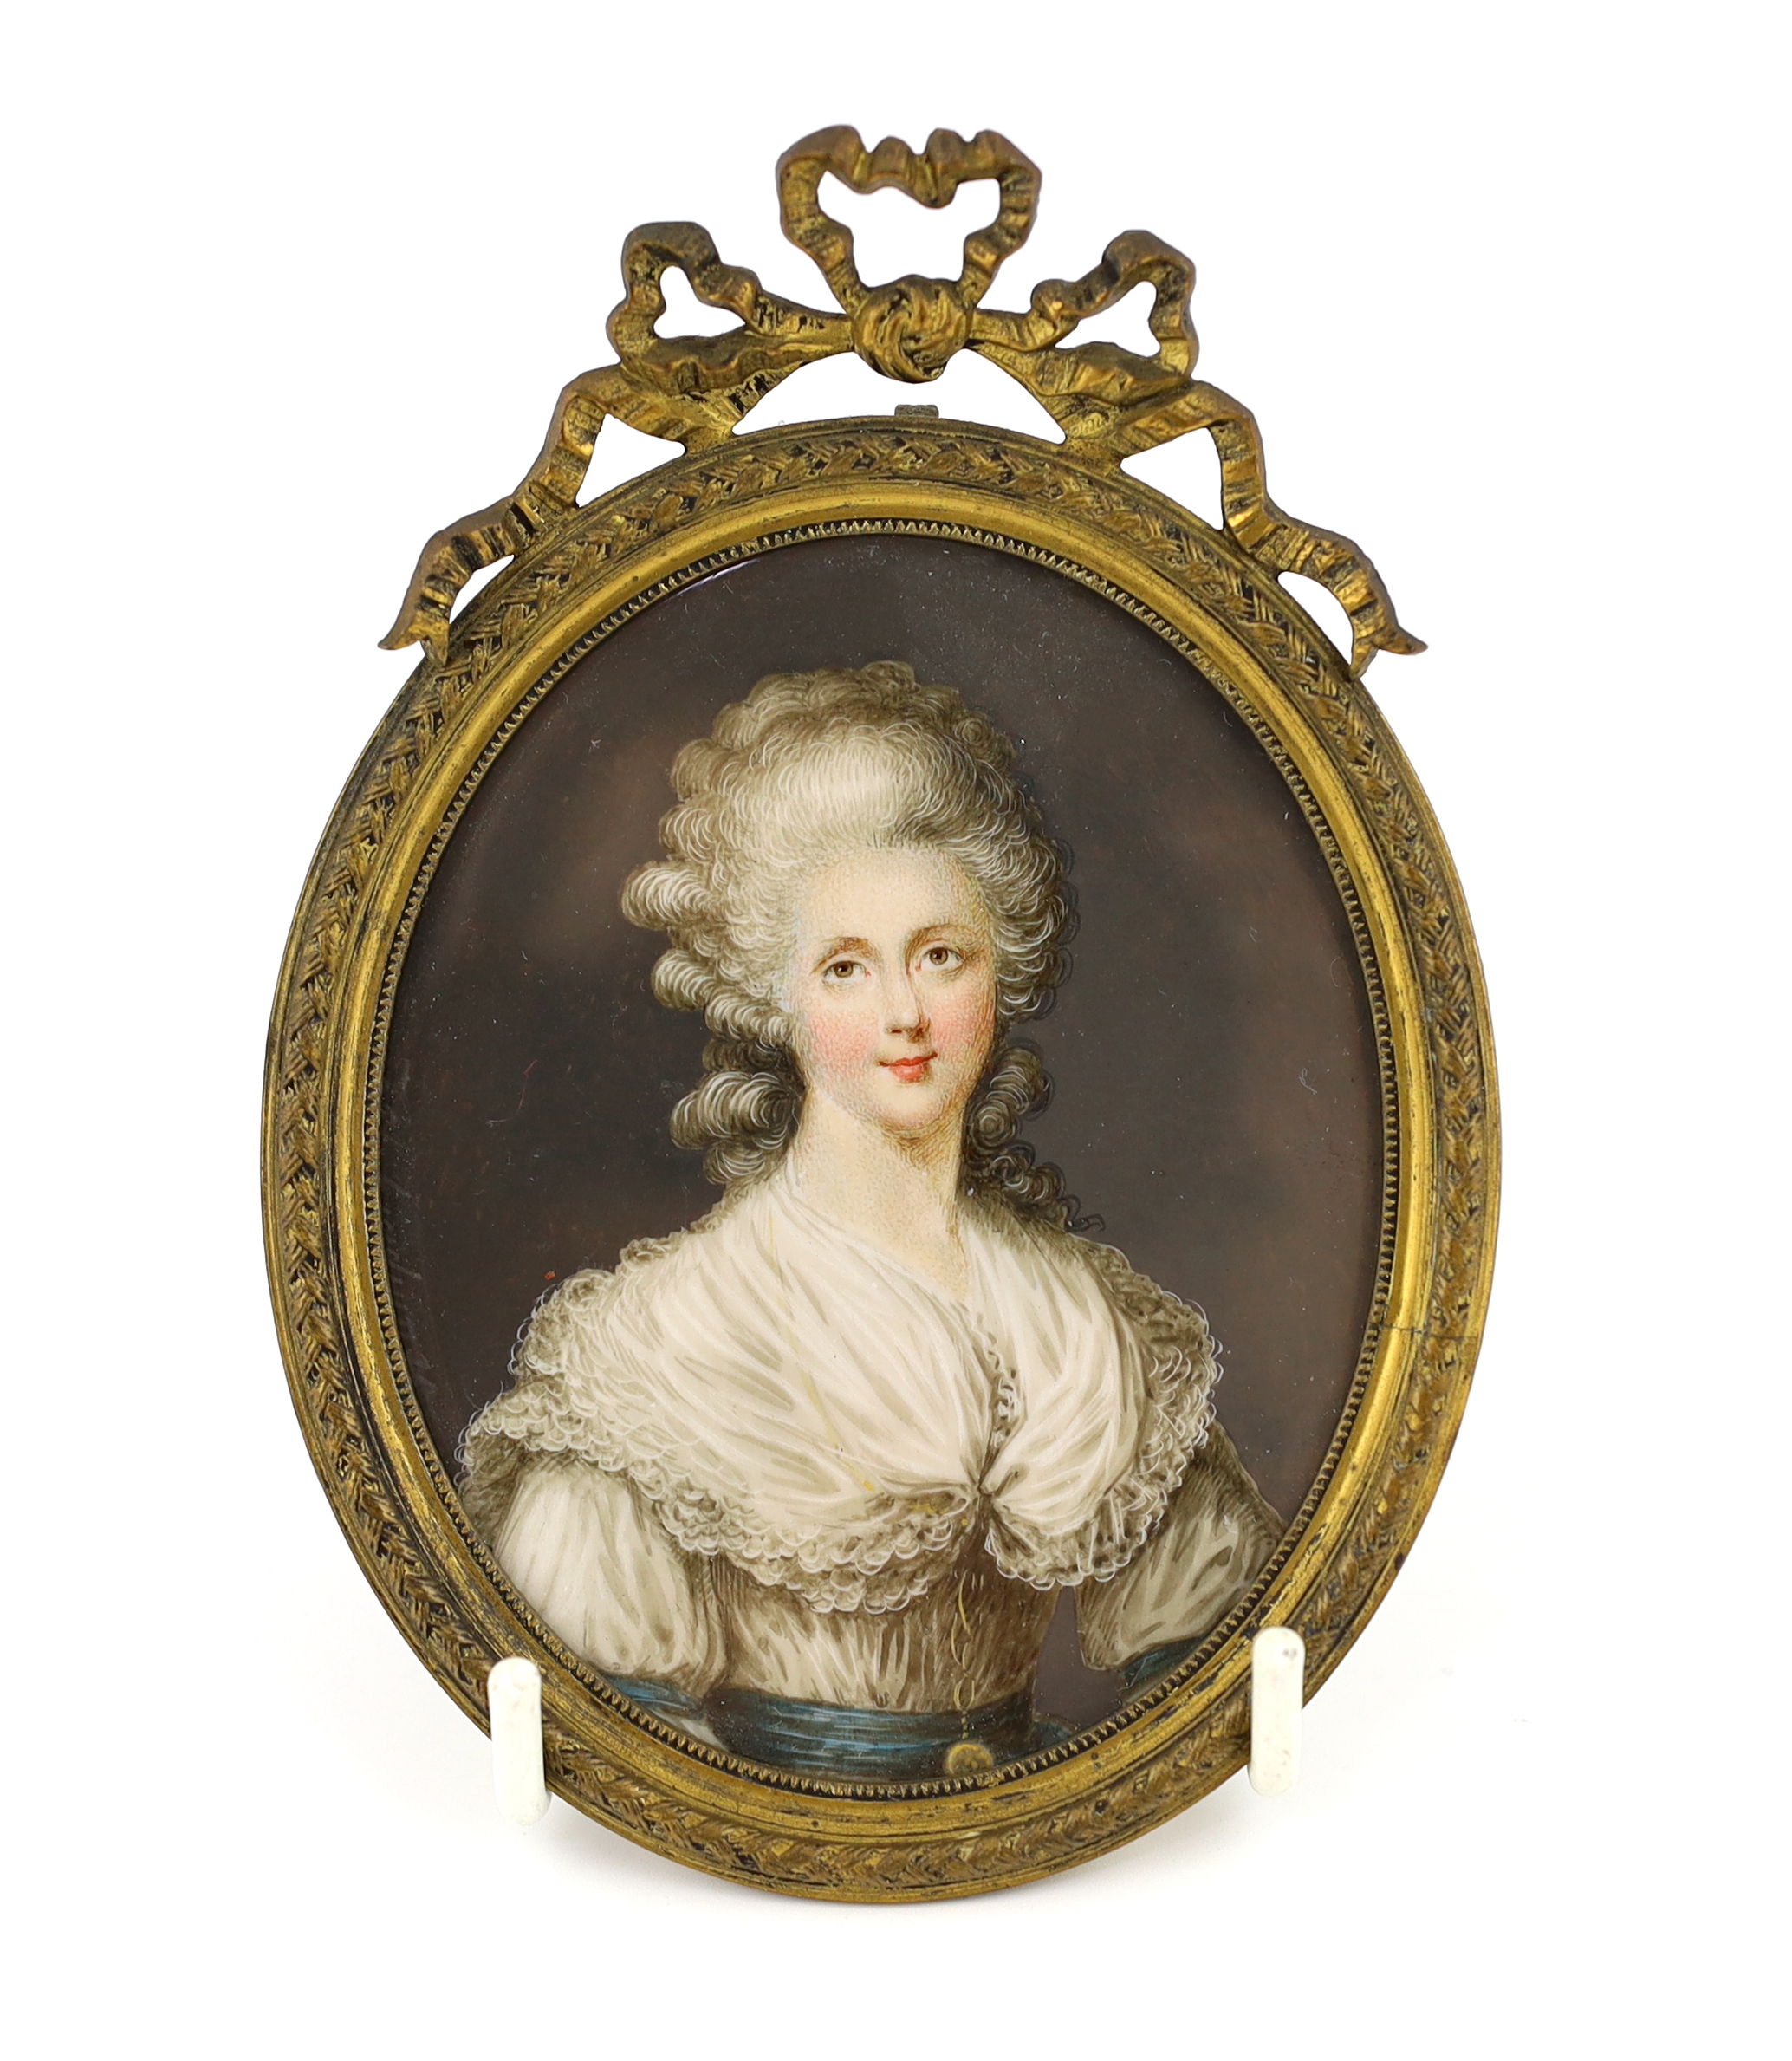 After Ozias Humphrey (English, 1742-1810), Portrait miniature of Sarah Villiers, Viscountess of Jersey, watercolour on ivory, 8.7 x 7cm. CITES Submission reference CZ9HM9C7